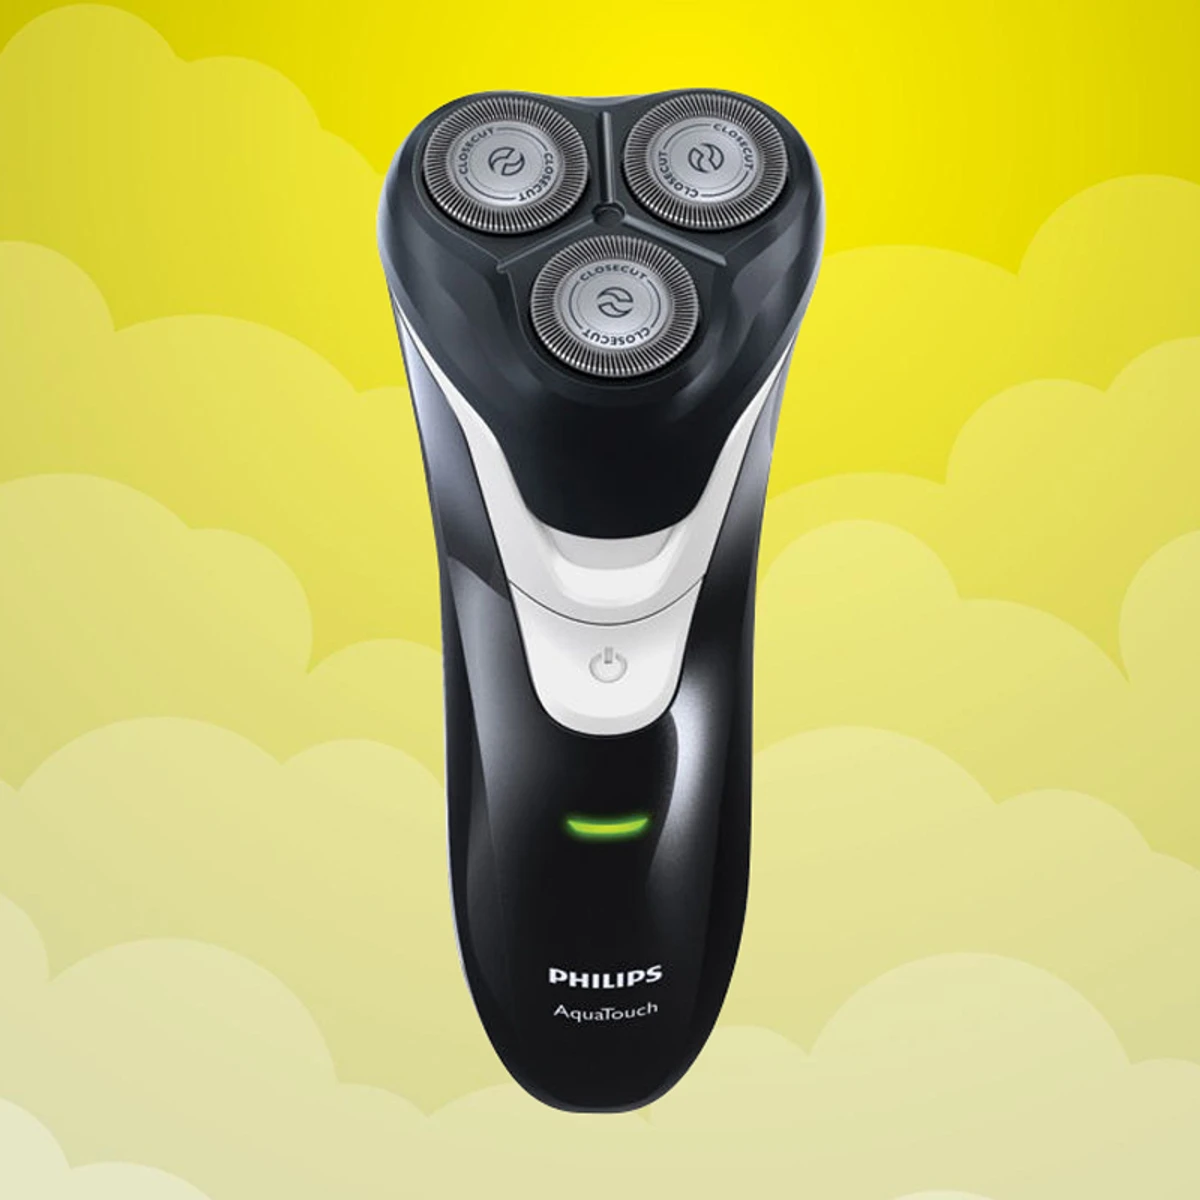 Philips AquaTouch Shaver For Men - AT610